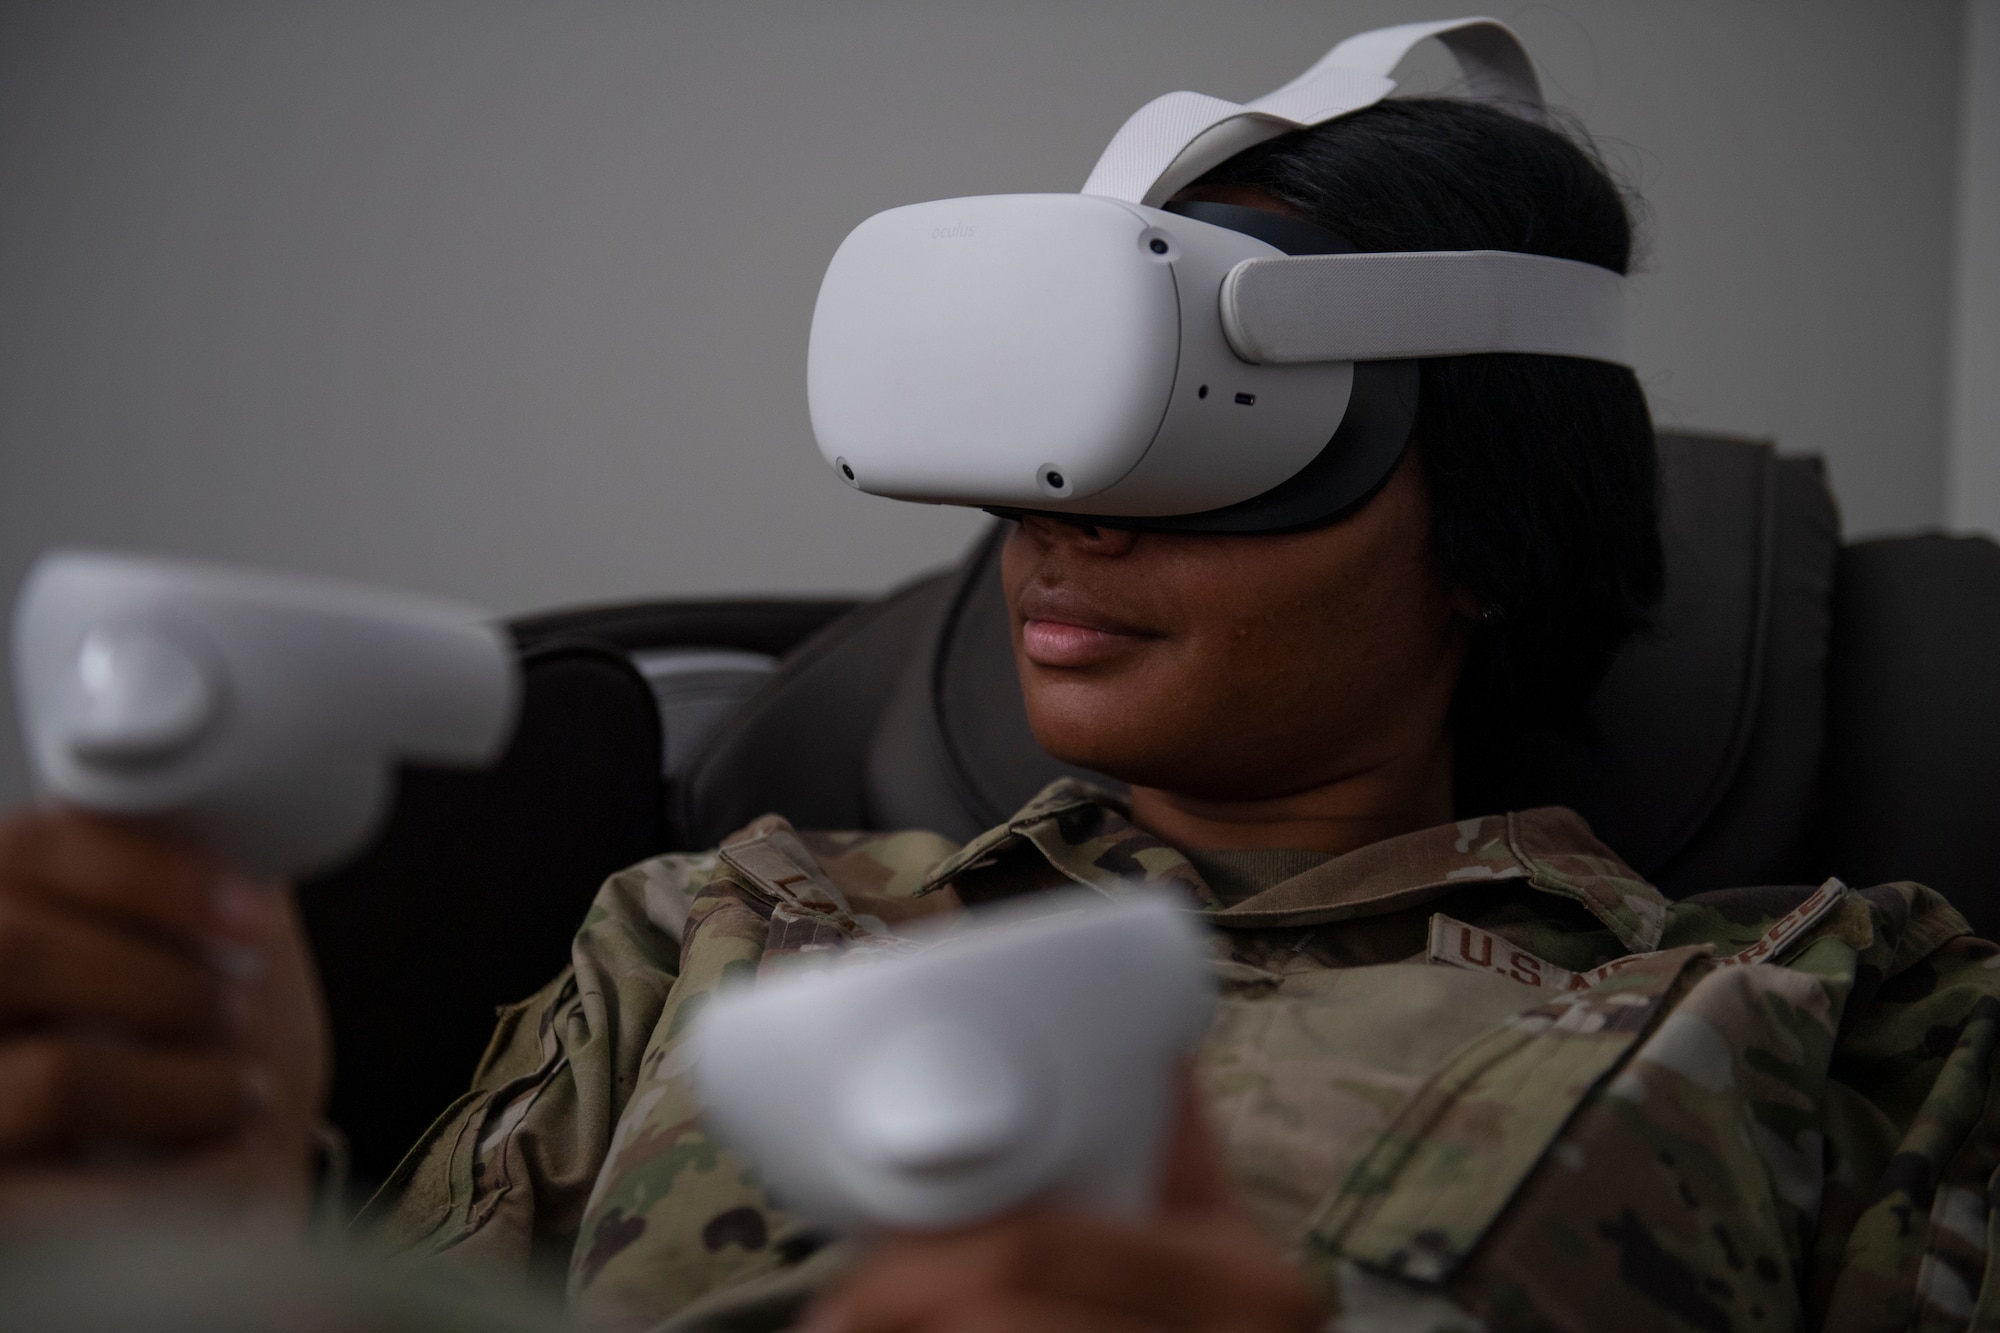 A photo of a female Airman with a VR headset on and holding the controls.